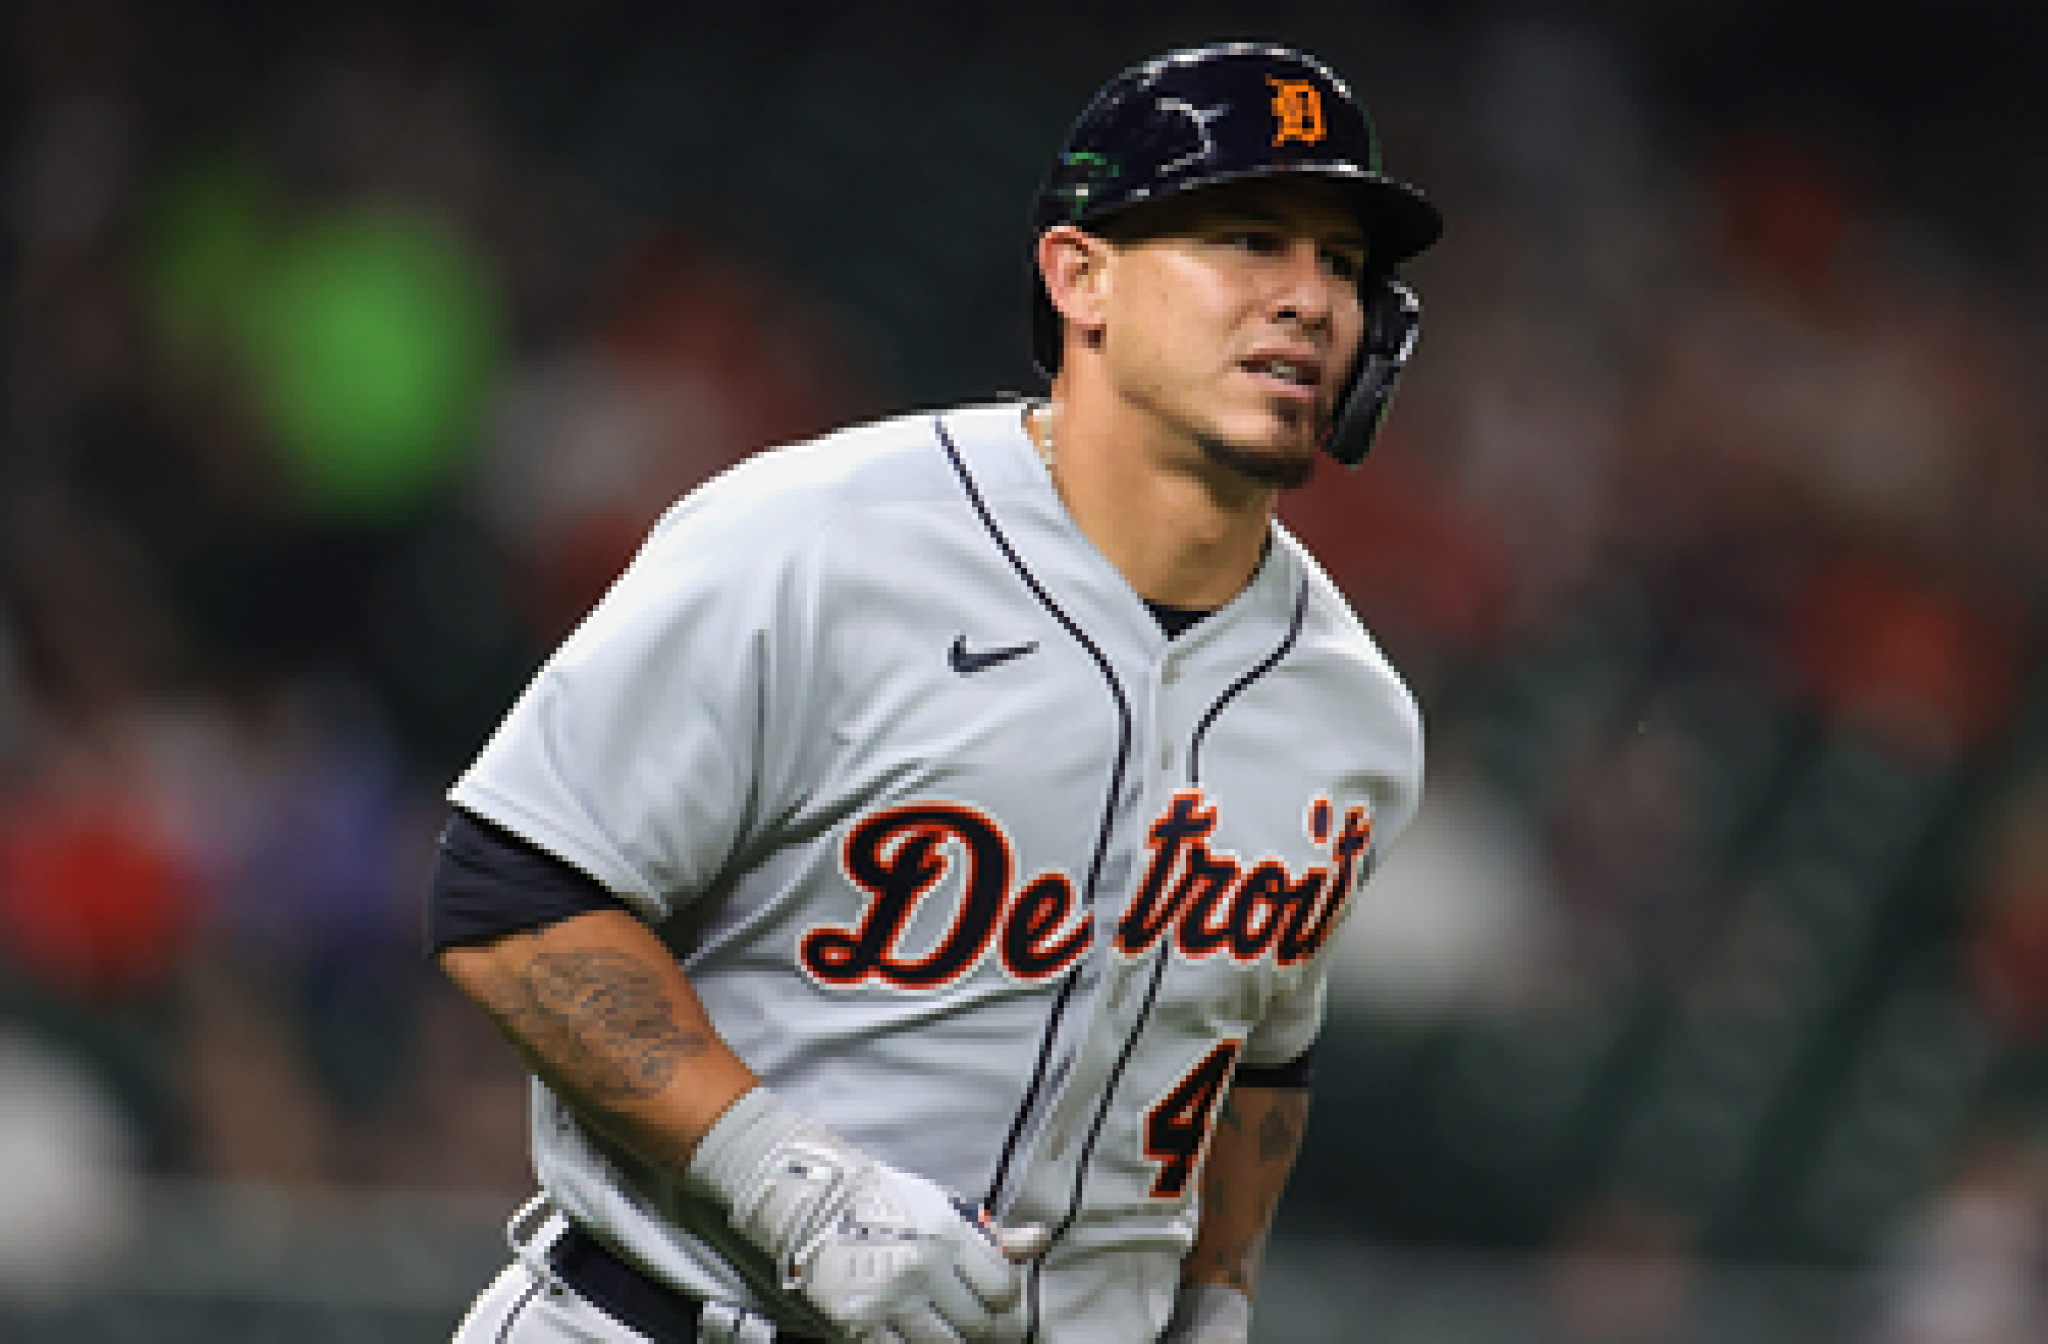 Tigers belt five home runs including two from Wilson Ramos in 8-2 over Astros